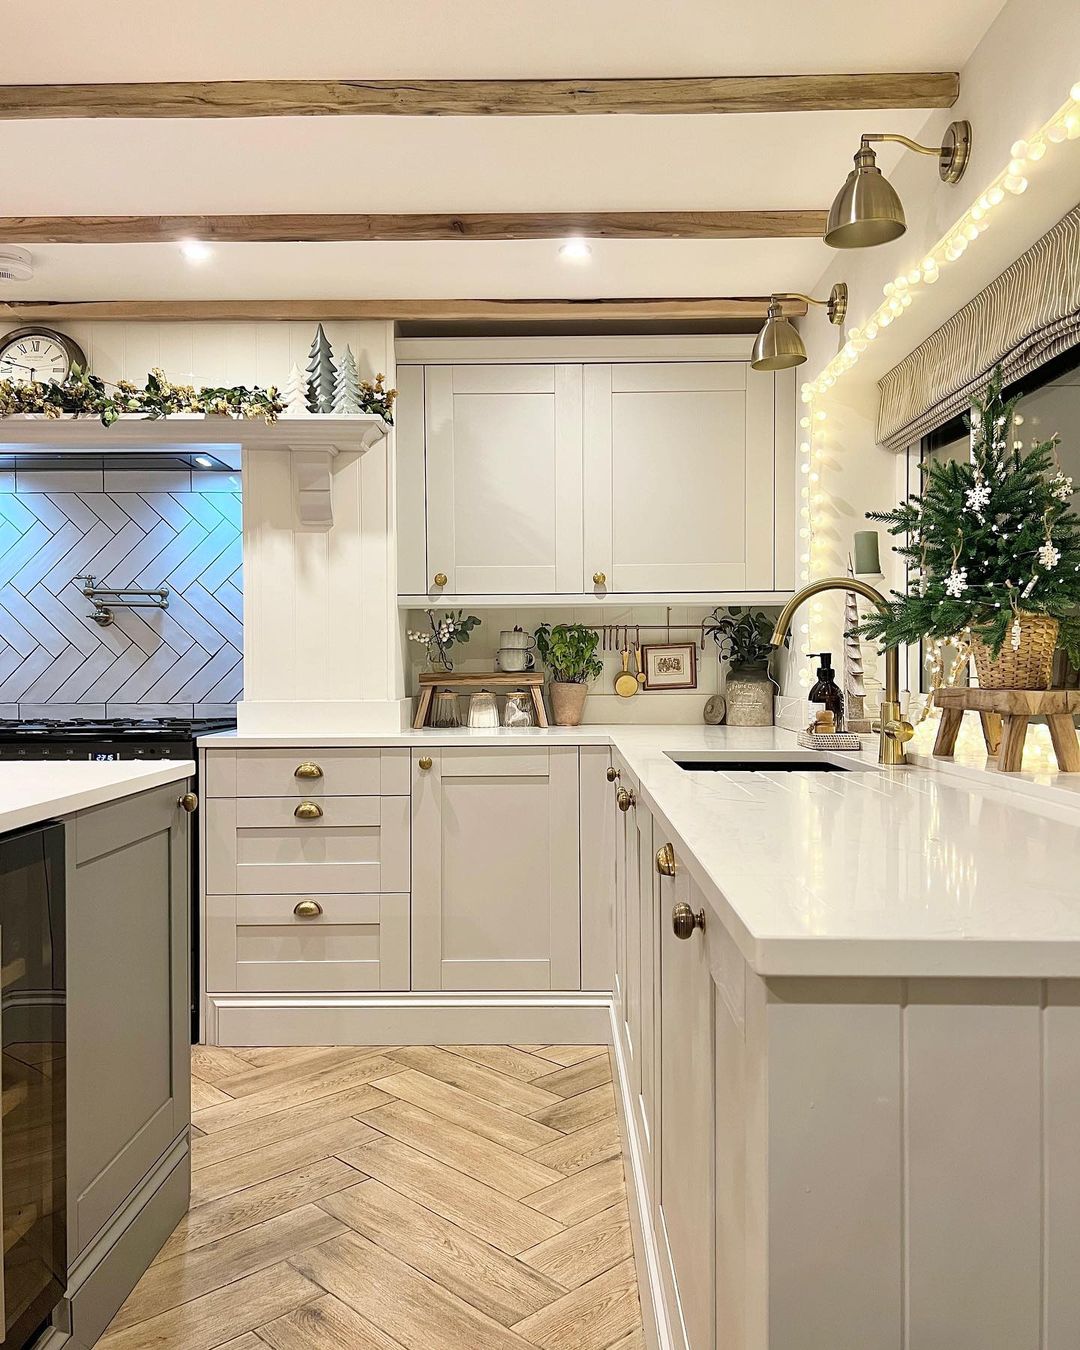 Festive Flair: Creamy Shaker Cabinets with Vintage Brass Knobs